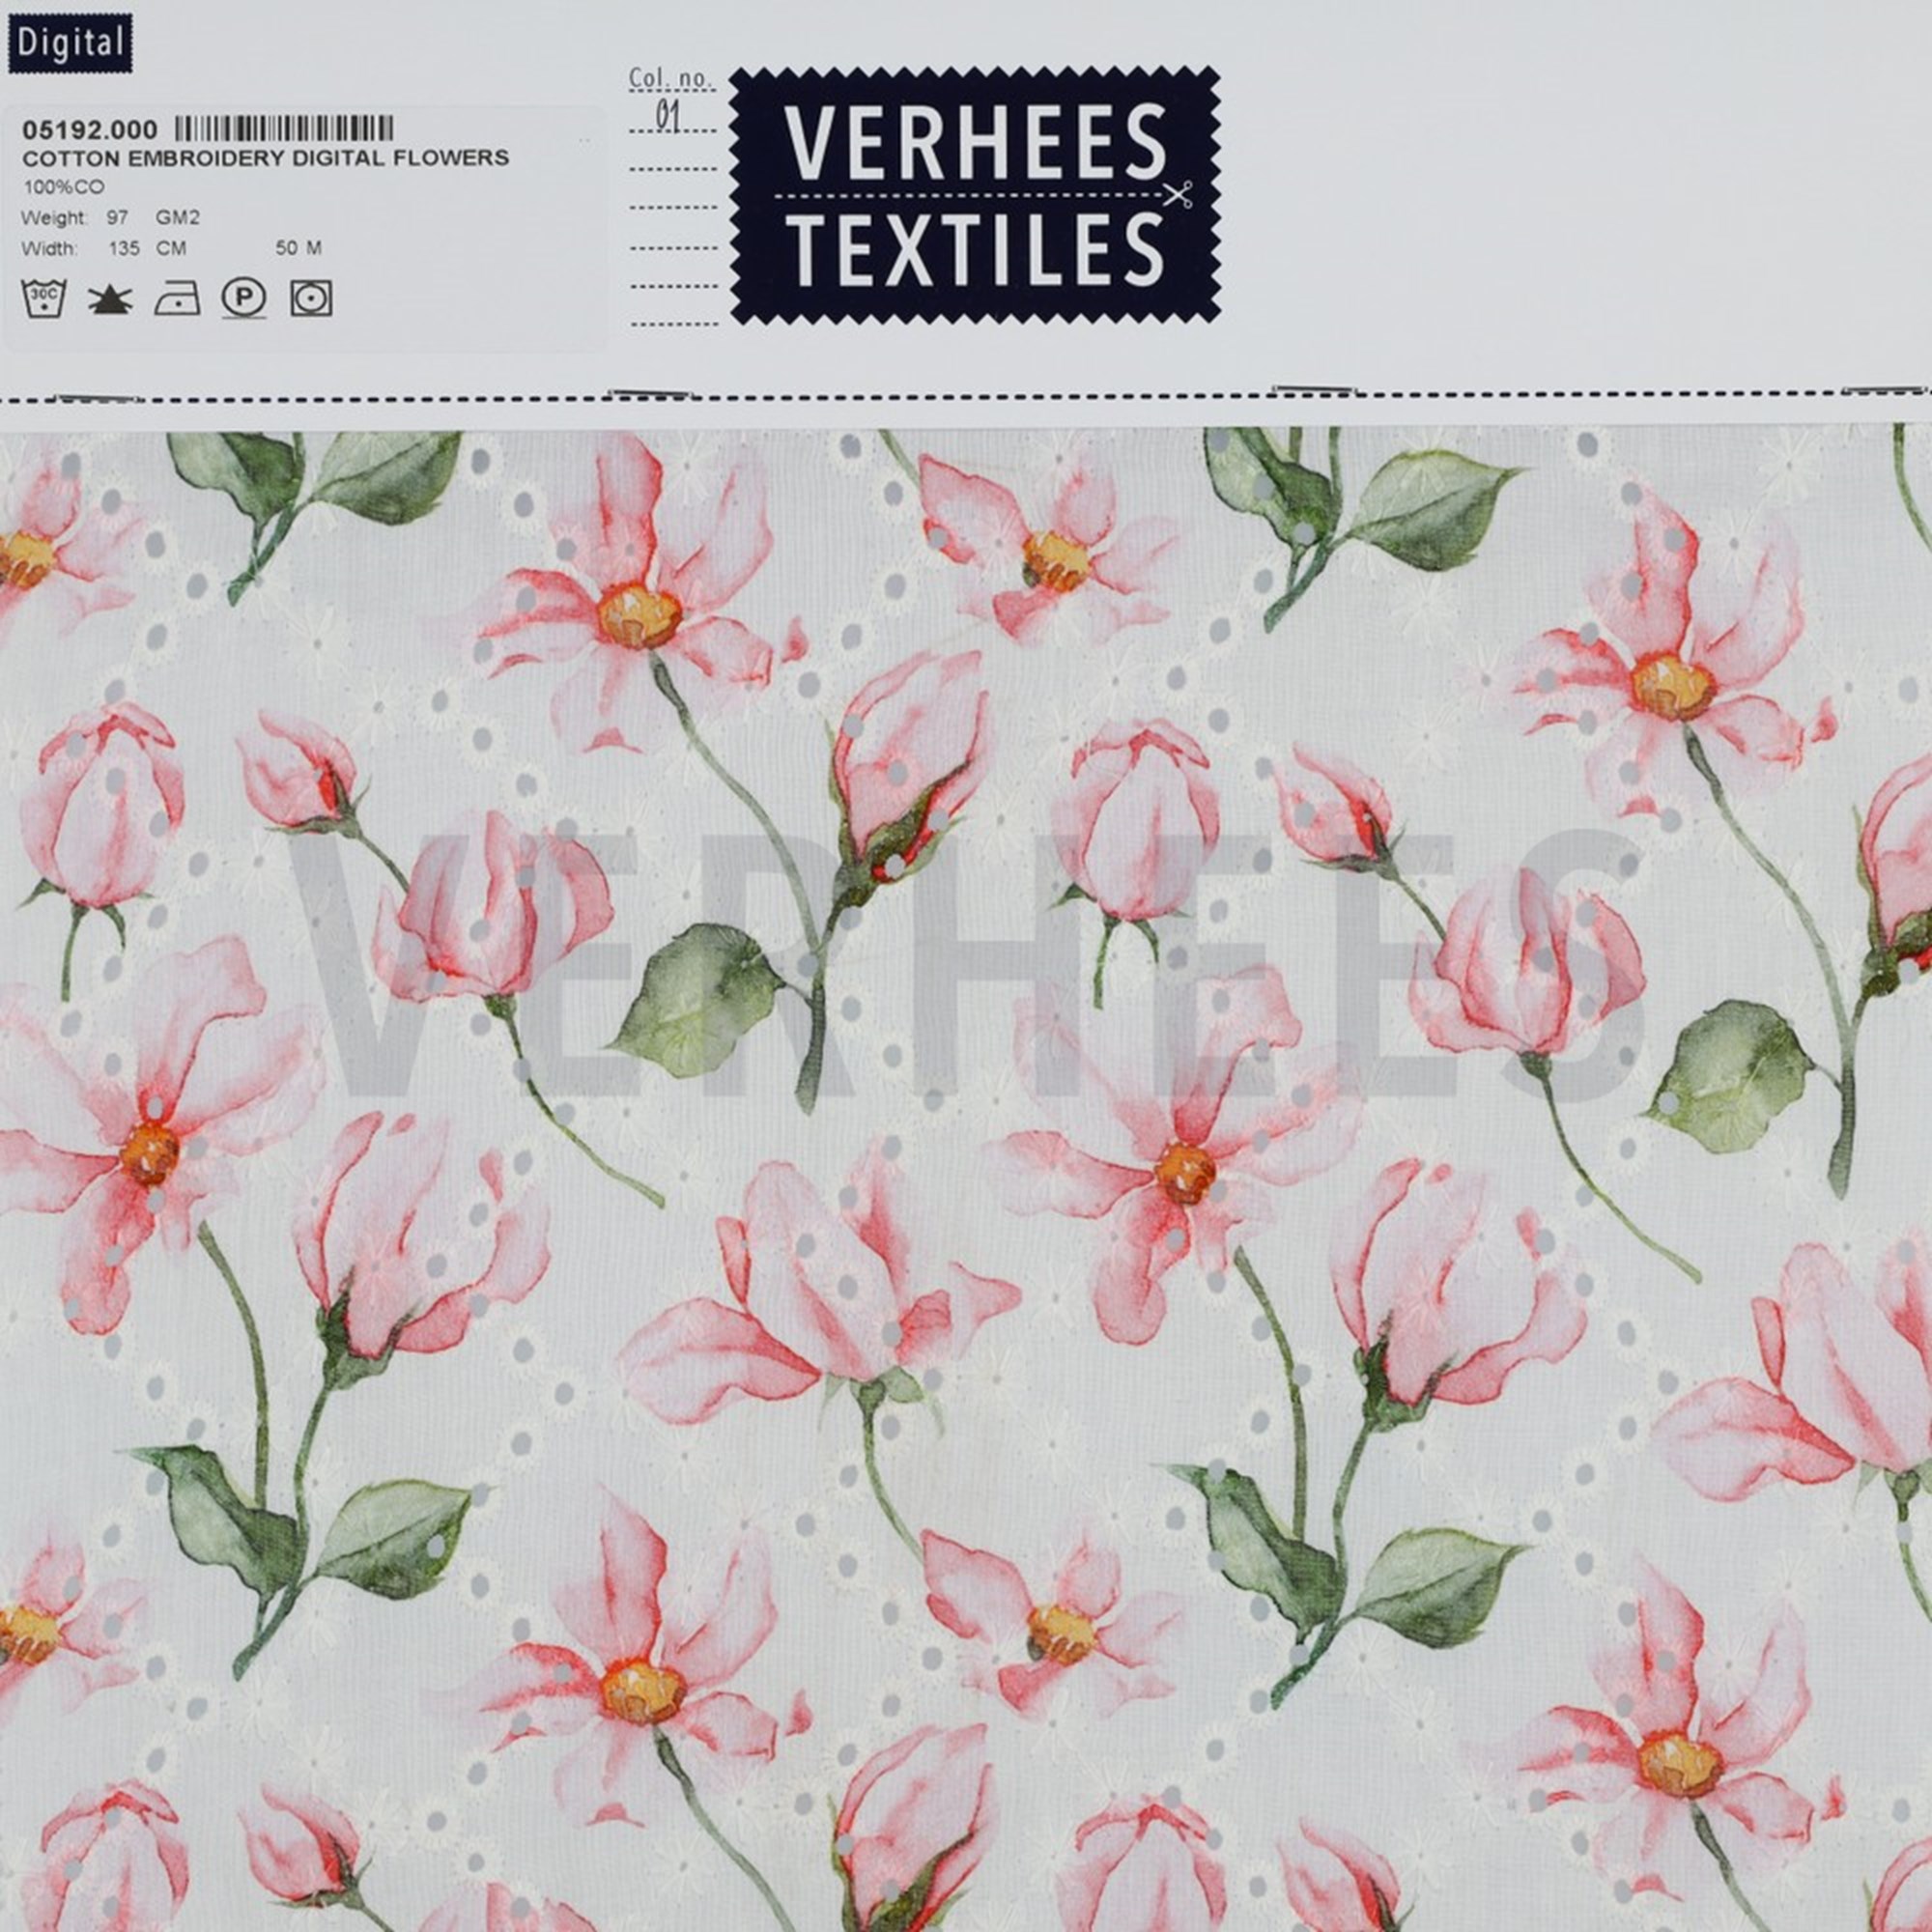 COTTON EMBROIDERY DIGITAL FLOWERS WHITE (high resolution) #4